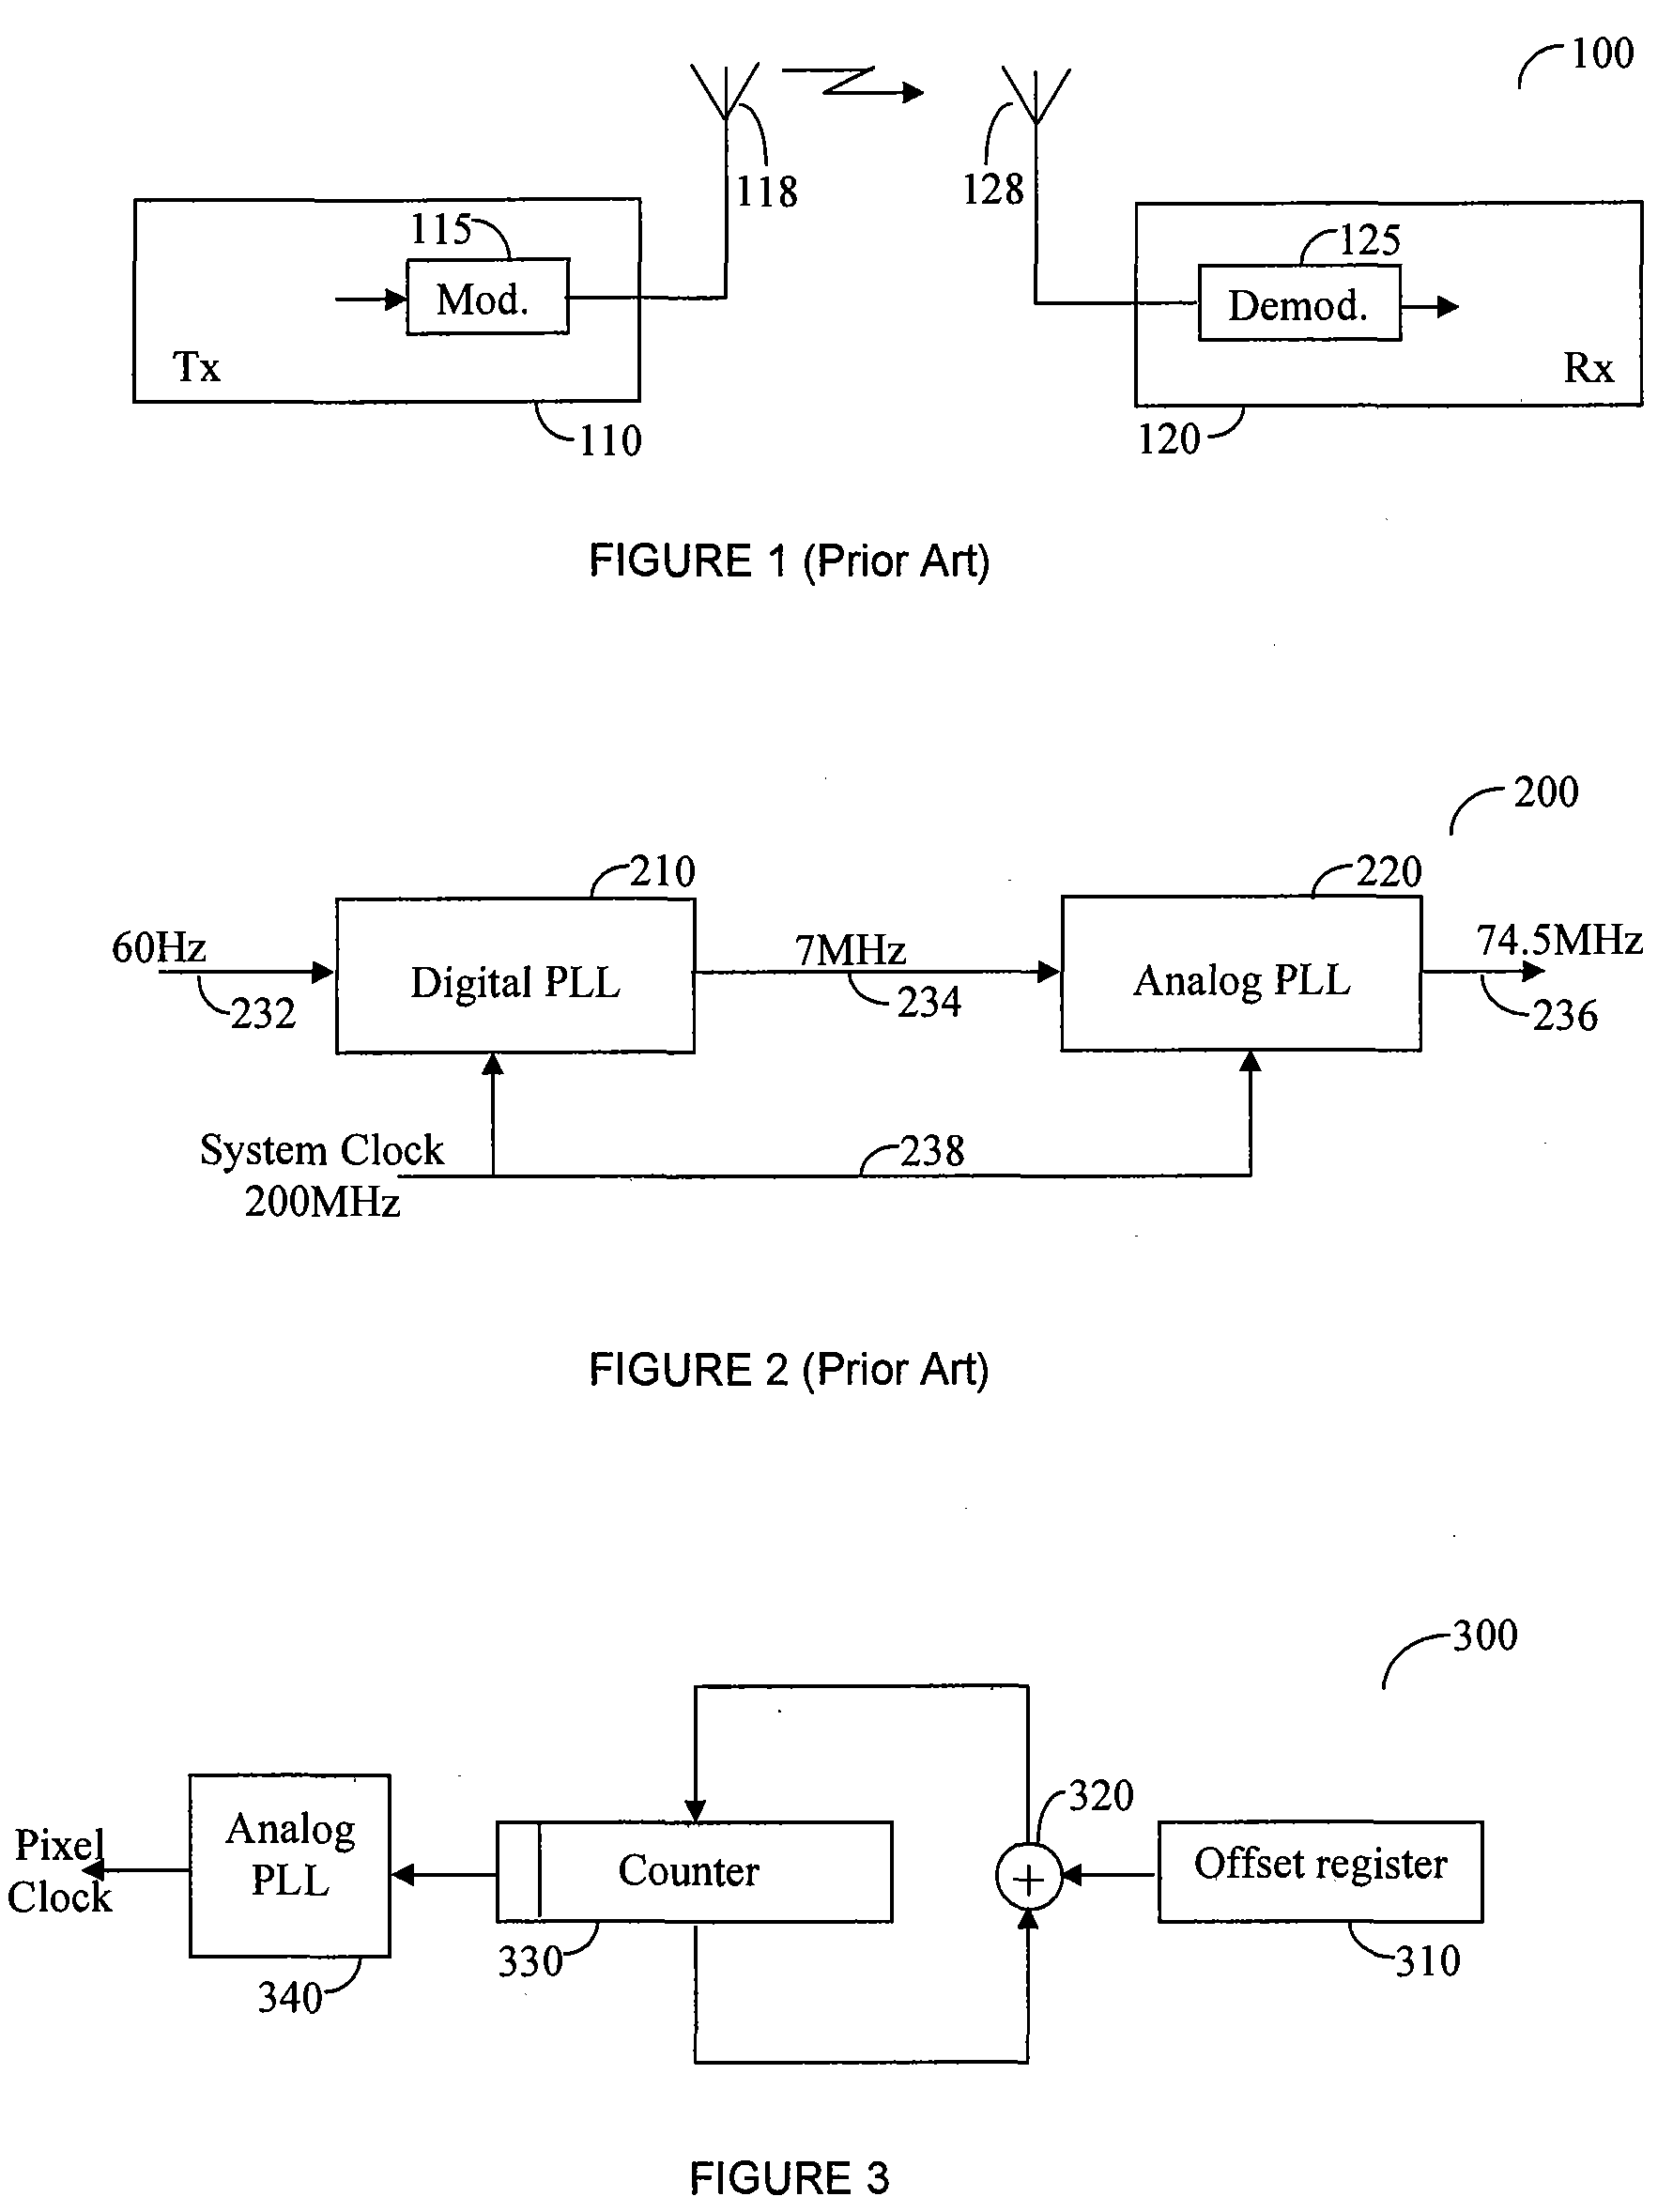 Generation of a Frame Synchronized Clock for a Wireless Video Receiver